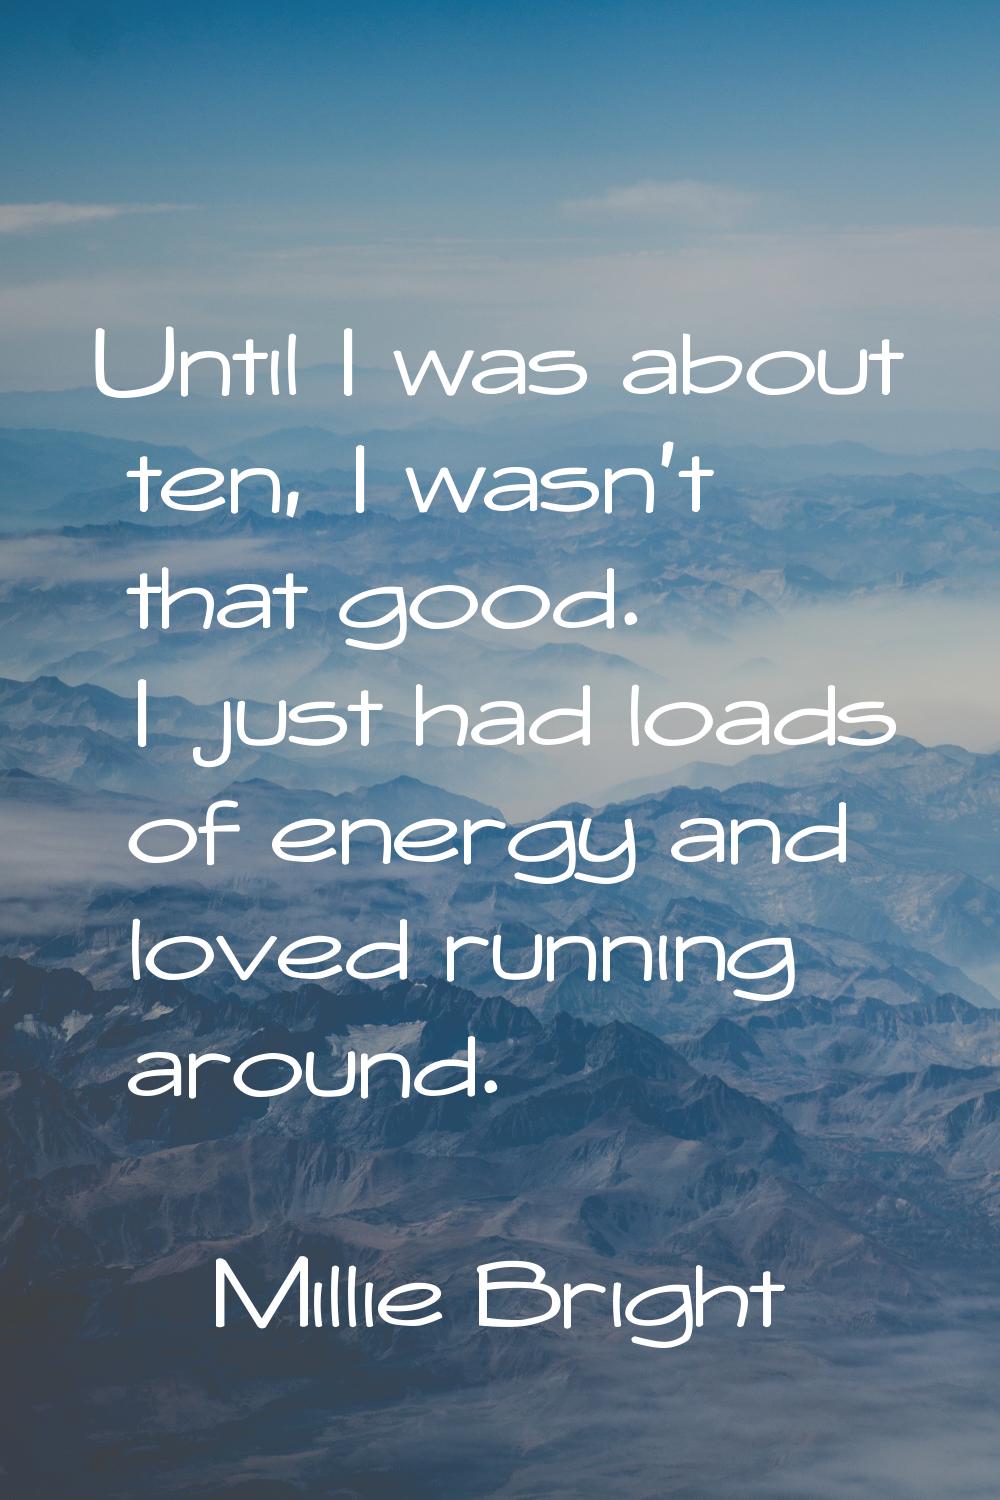 Until I was about ten, I wasn't that good. I just had loads of energy and loved running around.